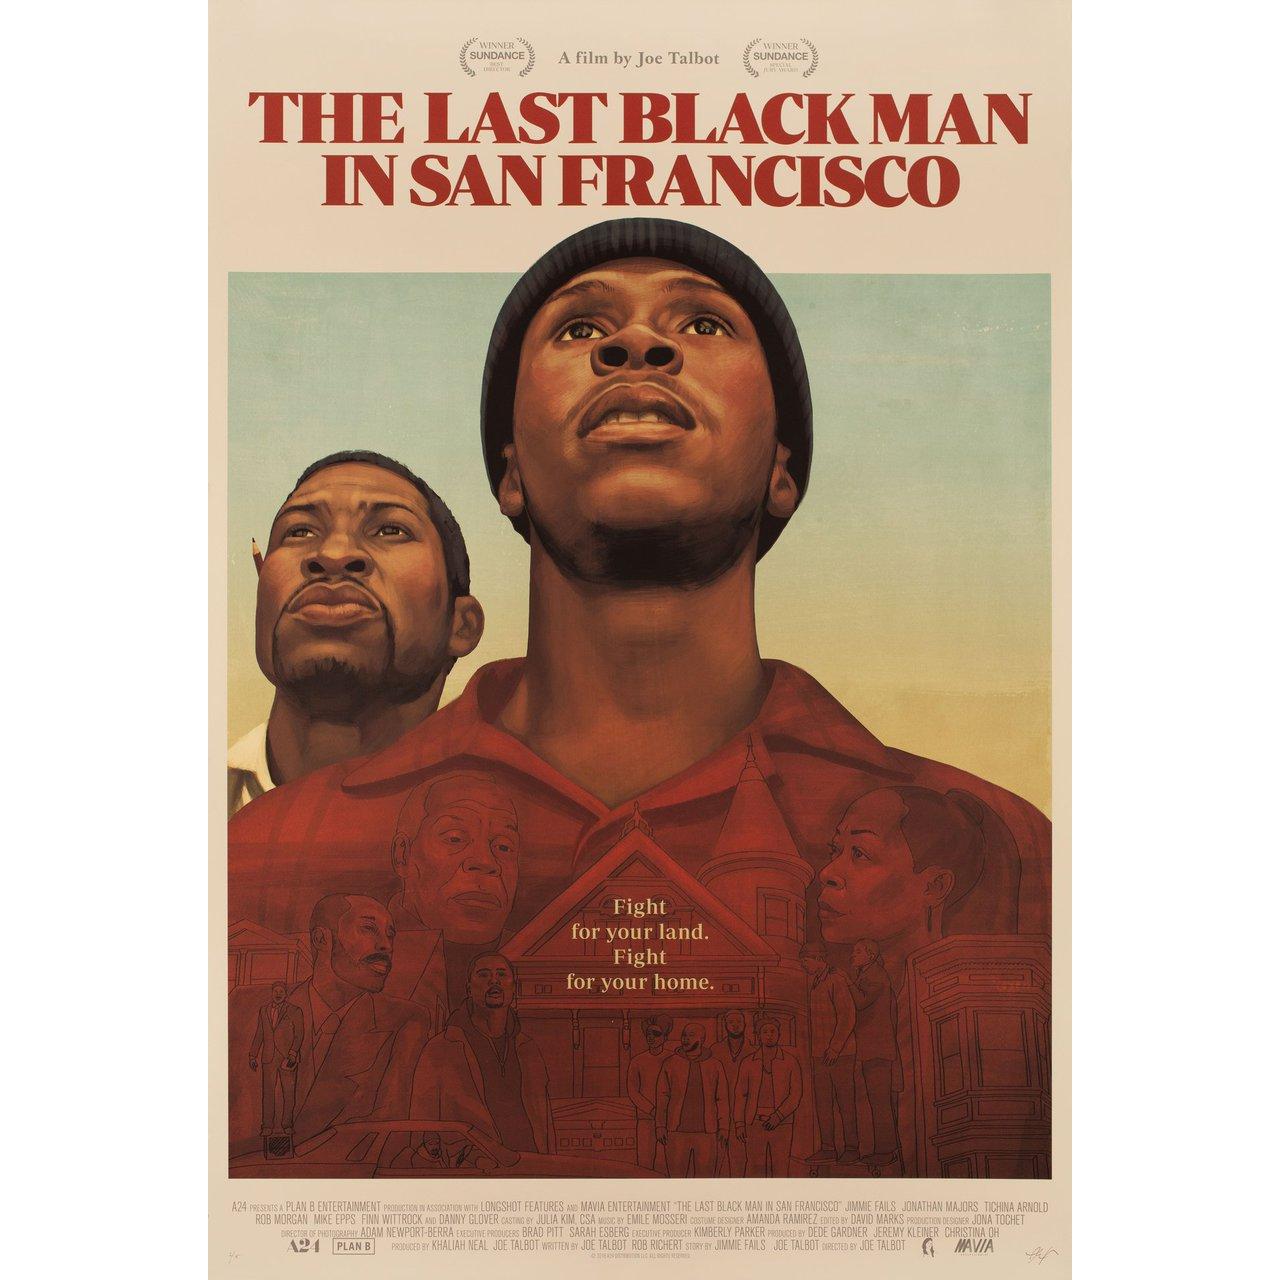 Original 2019 U.S. one sheet poster by Akiko Stehrenberger for the film The Last Black Man in San Francisco directed by Joe Talbot with Jimmie Fails / Jonathan Majors / Rob Morgan / Tichina Arnold. Very Good-Fine condition, rolled. Please note: the